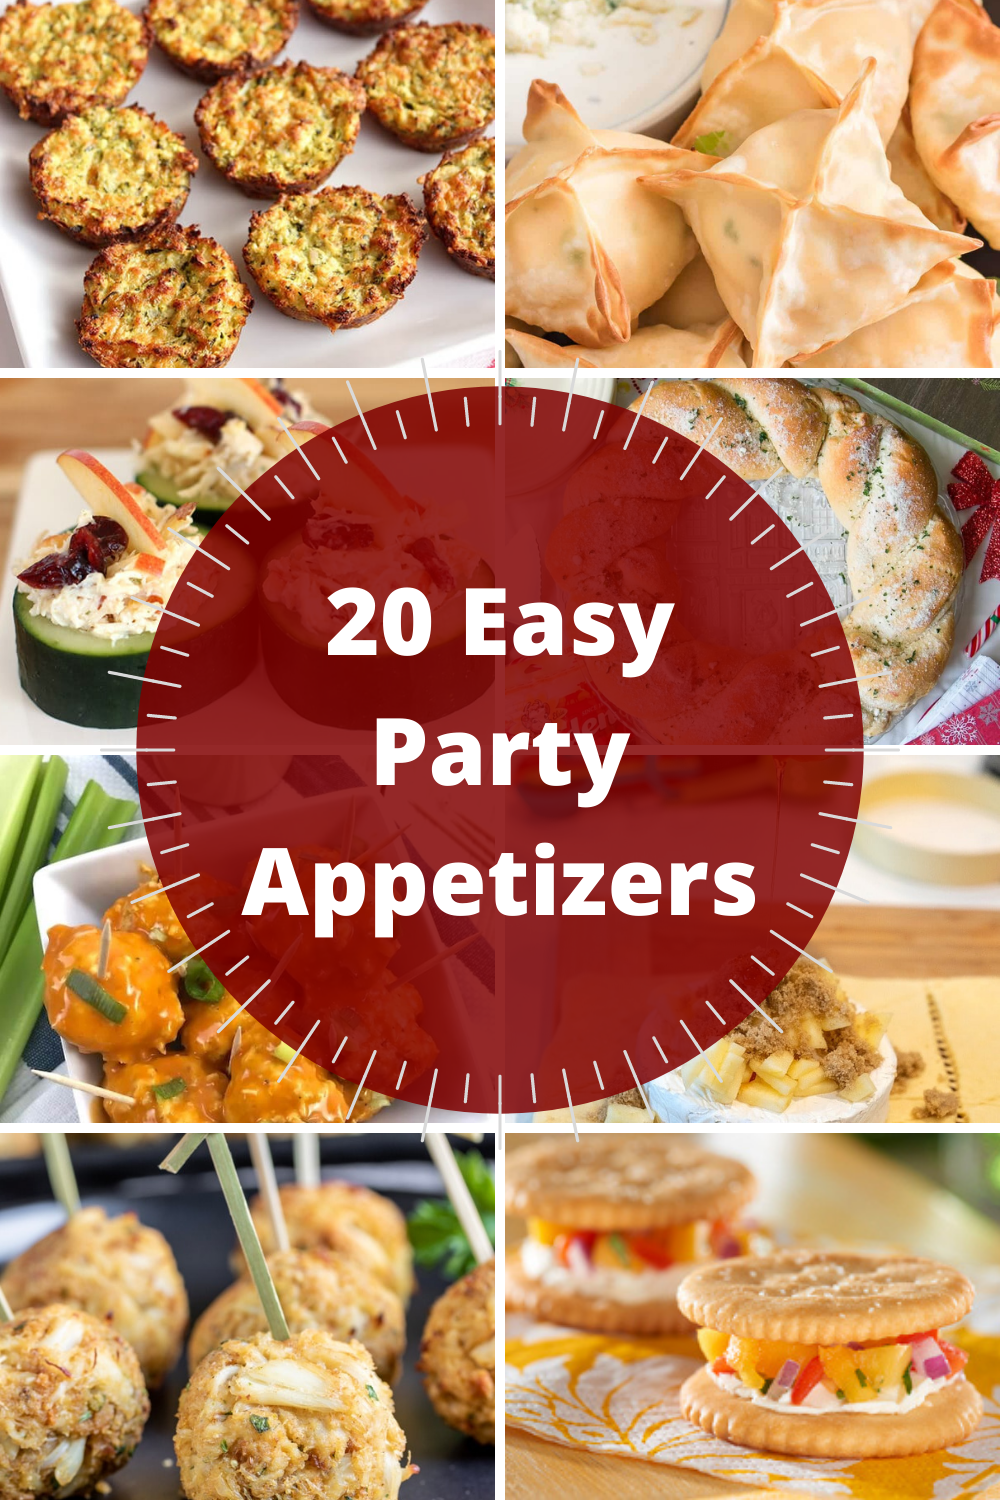 20 Easy Party Appetizers for the Holidays - Ripped Jeans & Bifocals